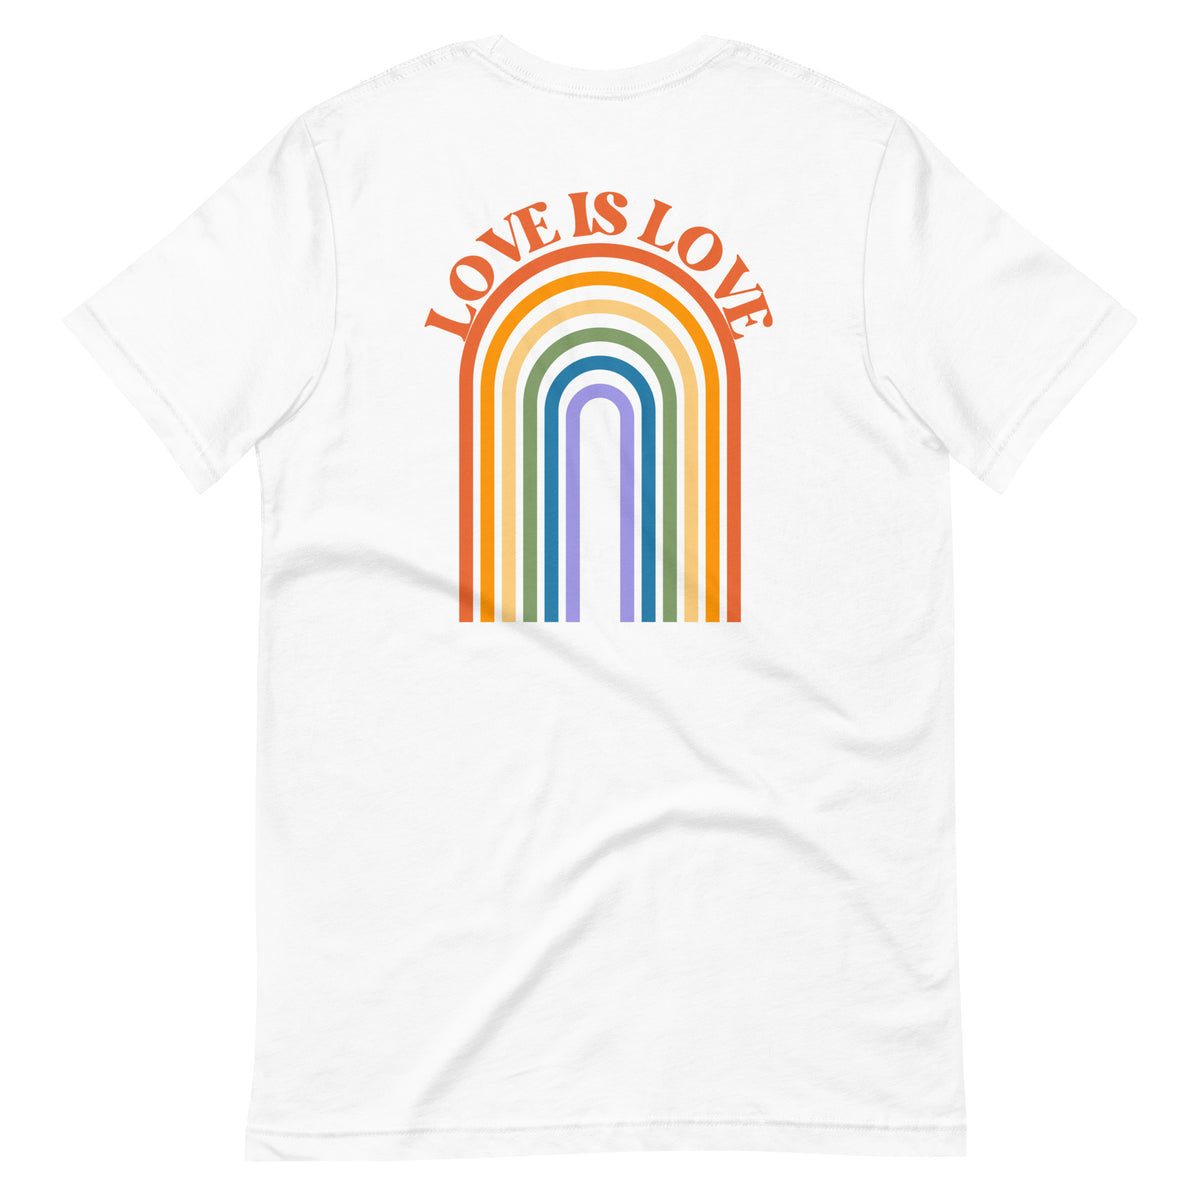 Love is Love Retro T-Shirt Front and Back Design